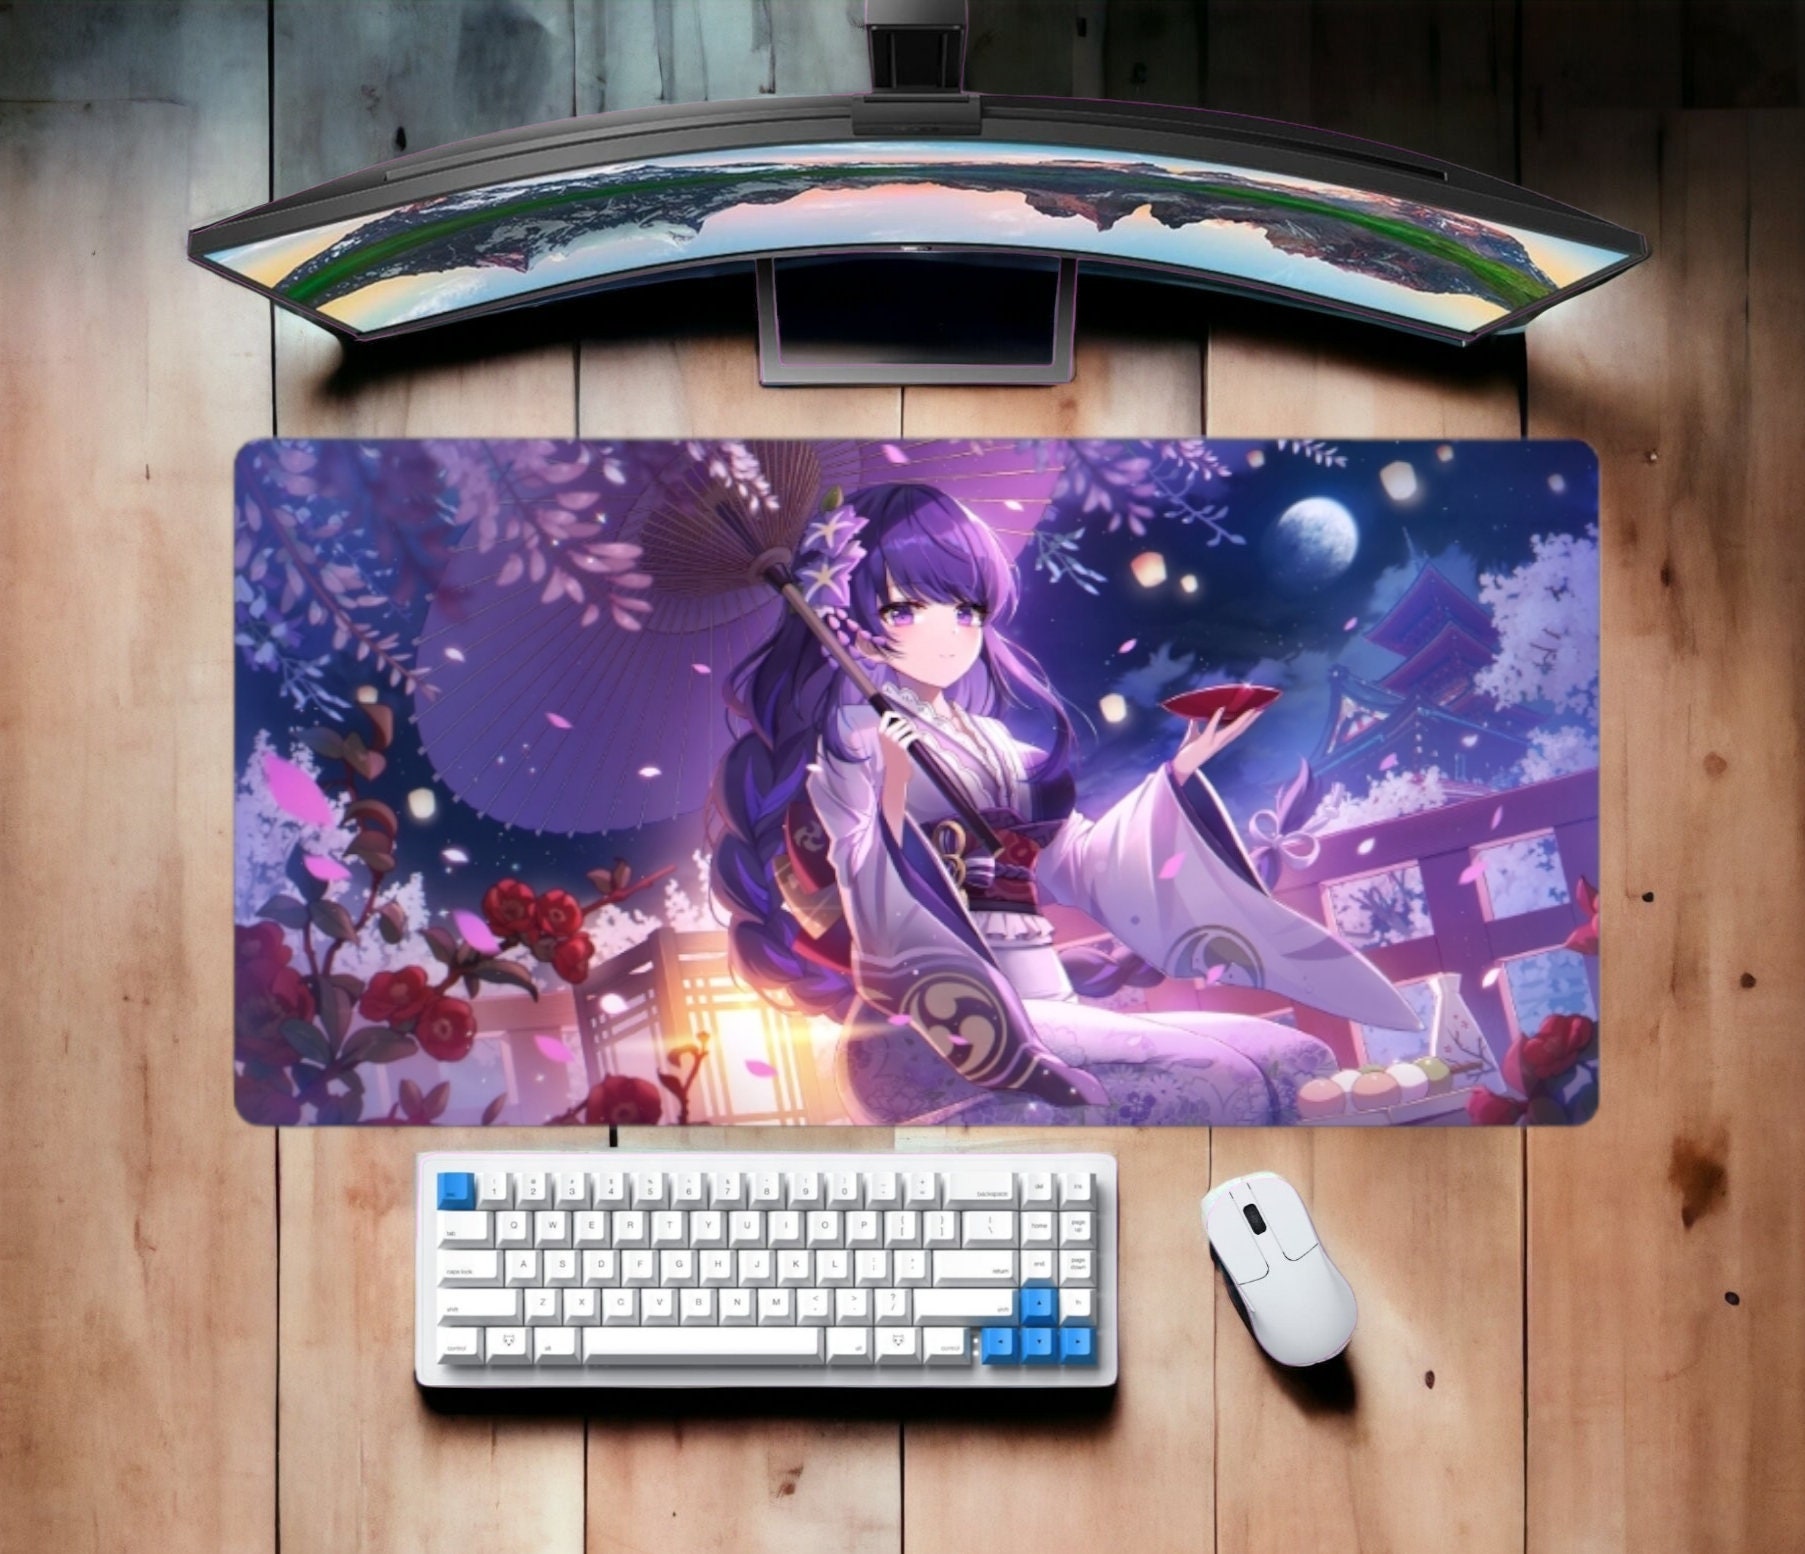 Anime Desk Mat Mouse Pad Gaming Accessories Non-Slip Table Keyboard  Masuepad Pc Gamer Rugs Rubber Carpet Art Mause Mousepad